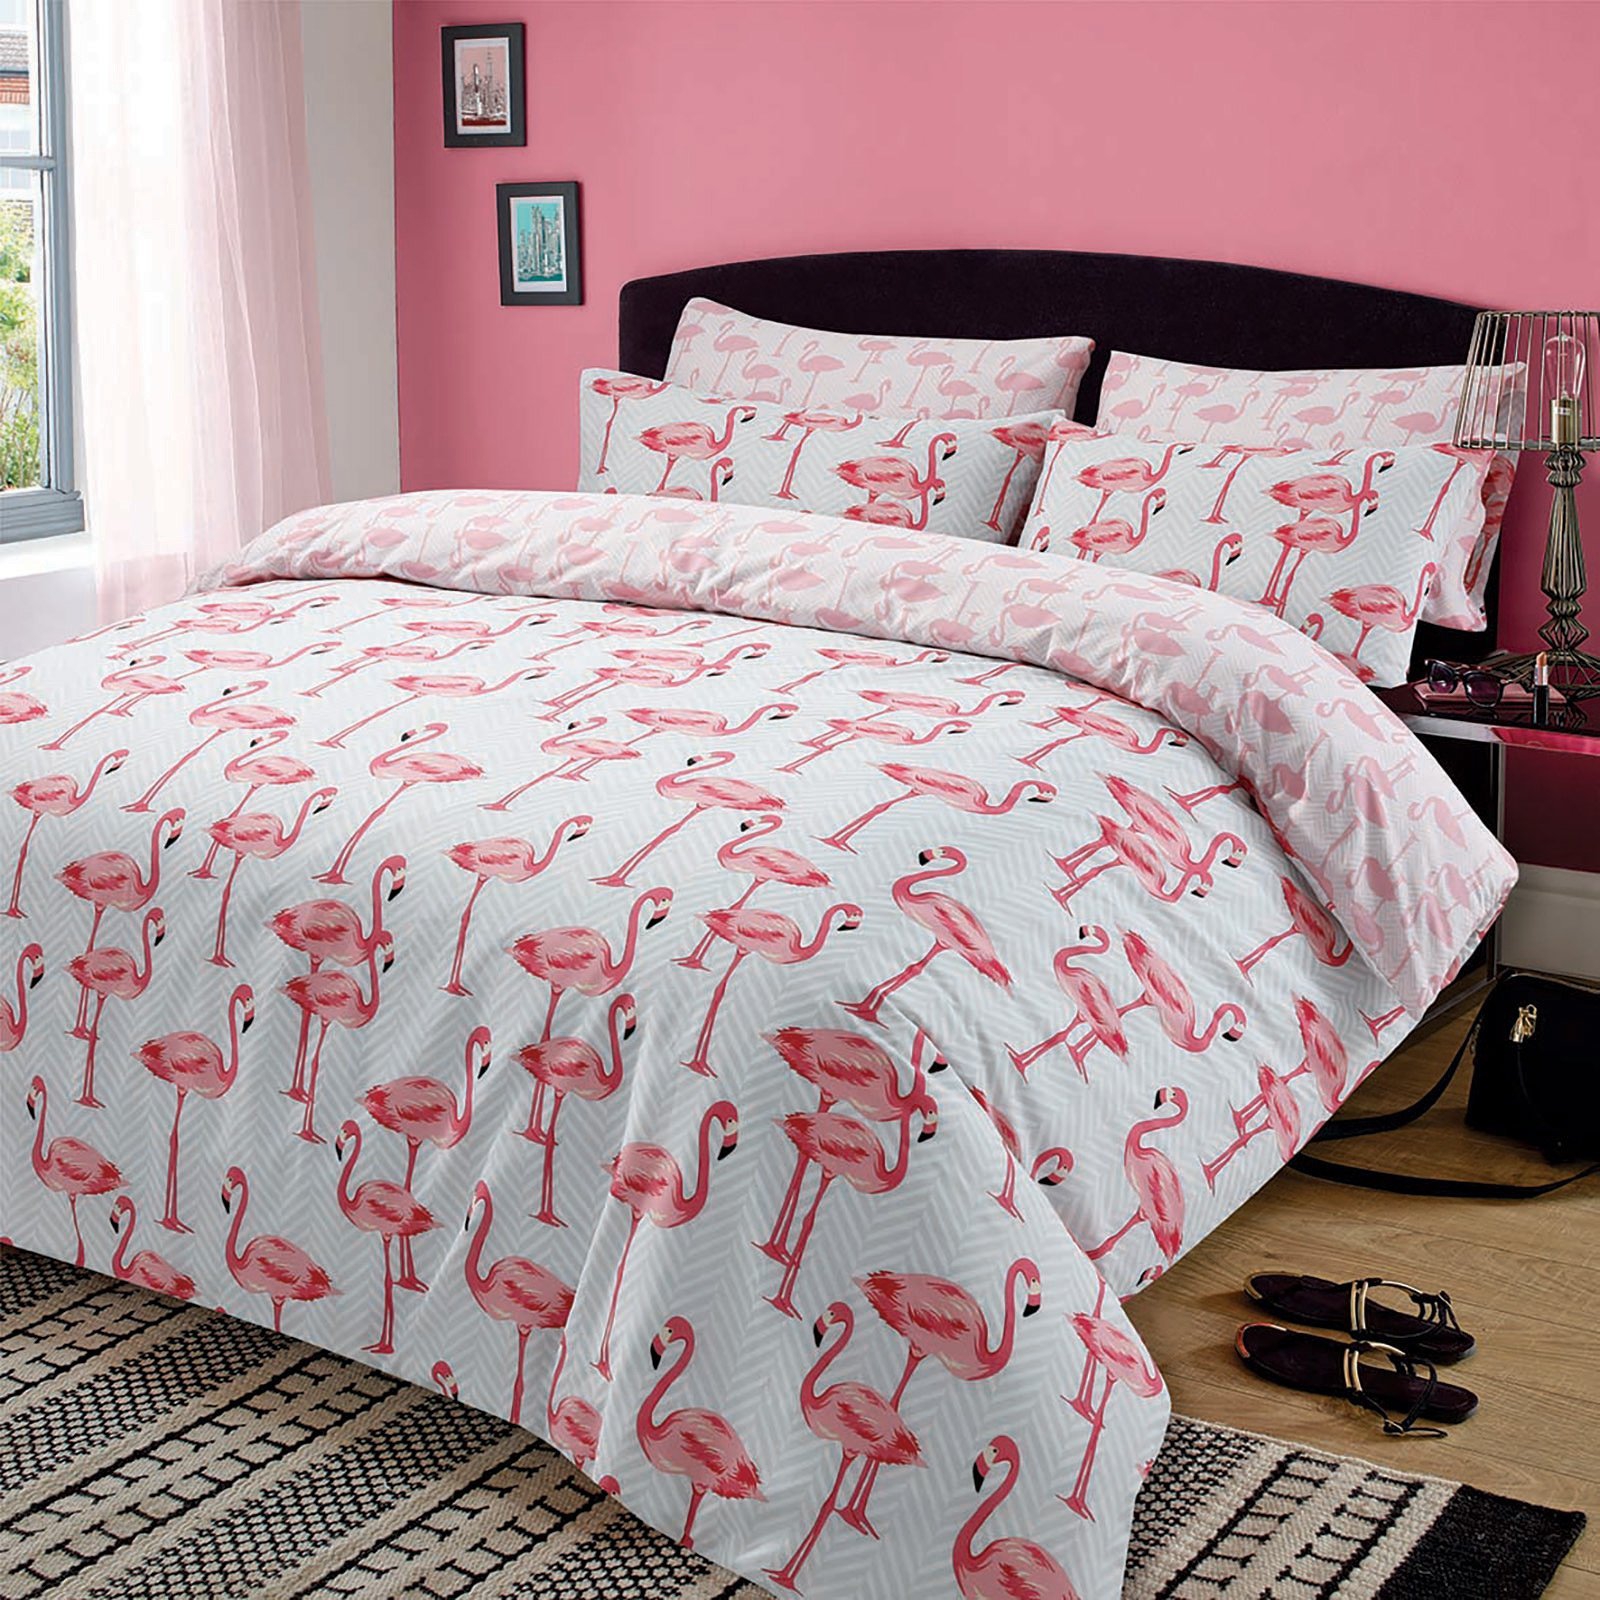 Flamingo 'Pink' Reversible Rotary Single Bed Duvet Quilt Cover Set